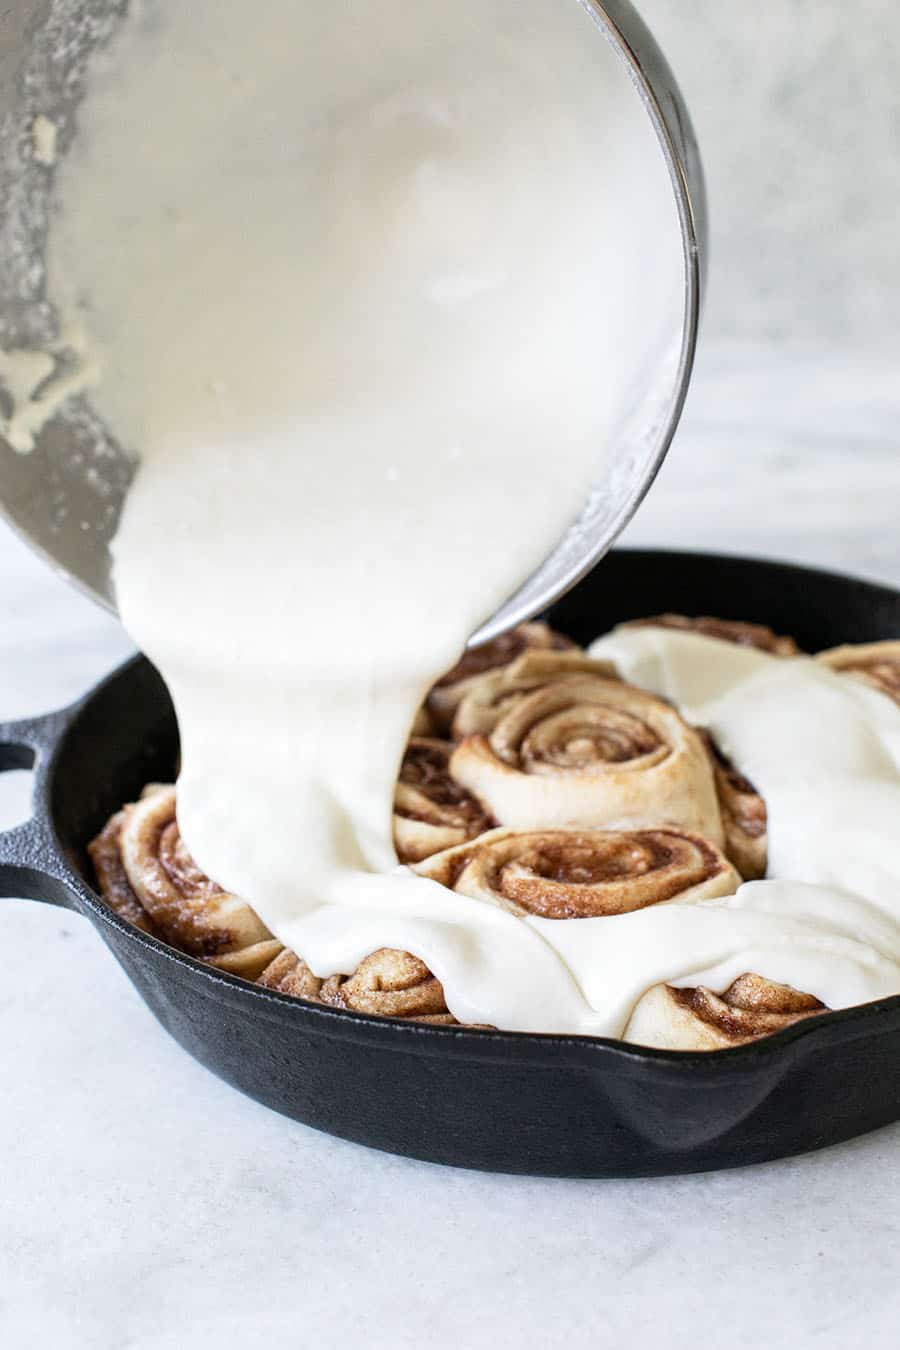 The glaze is poured over cinnamon rolls in a cast iron skillet.